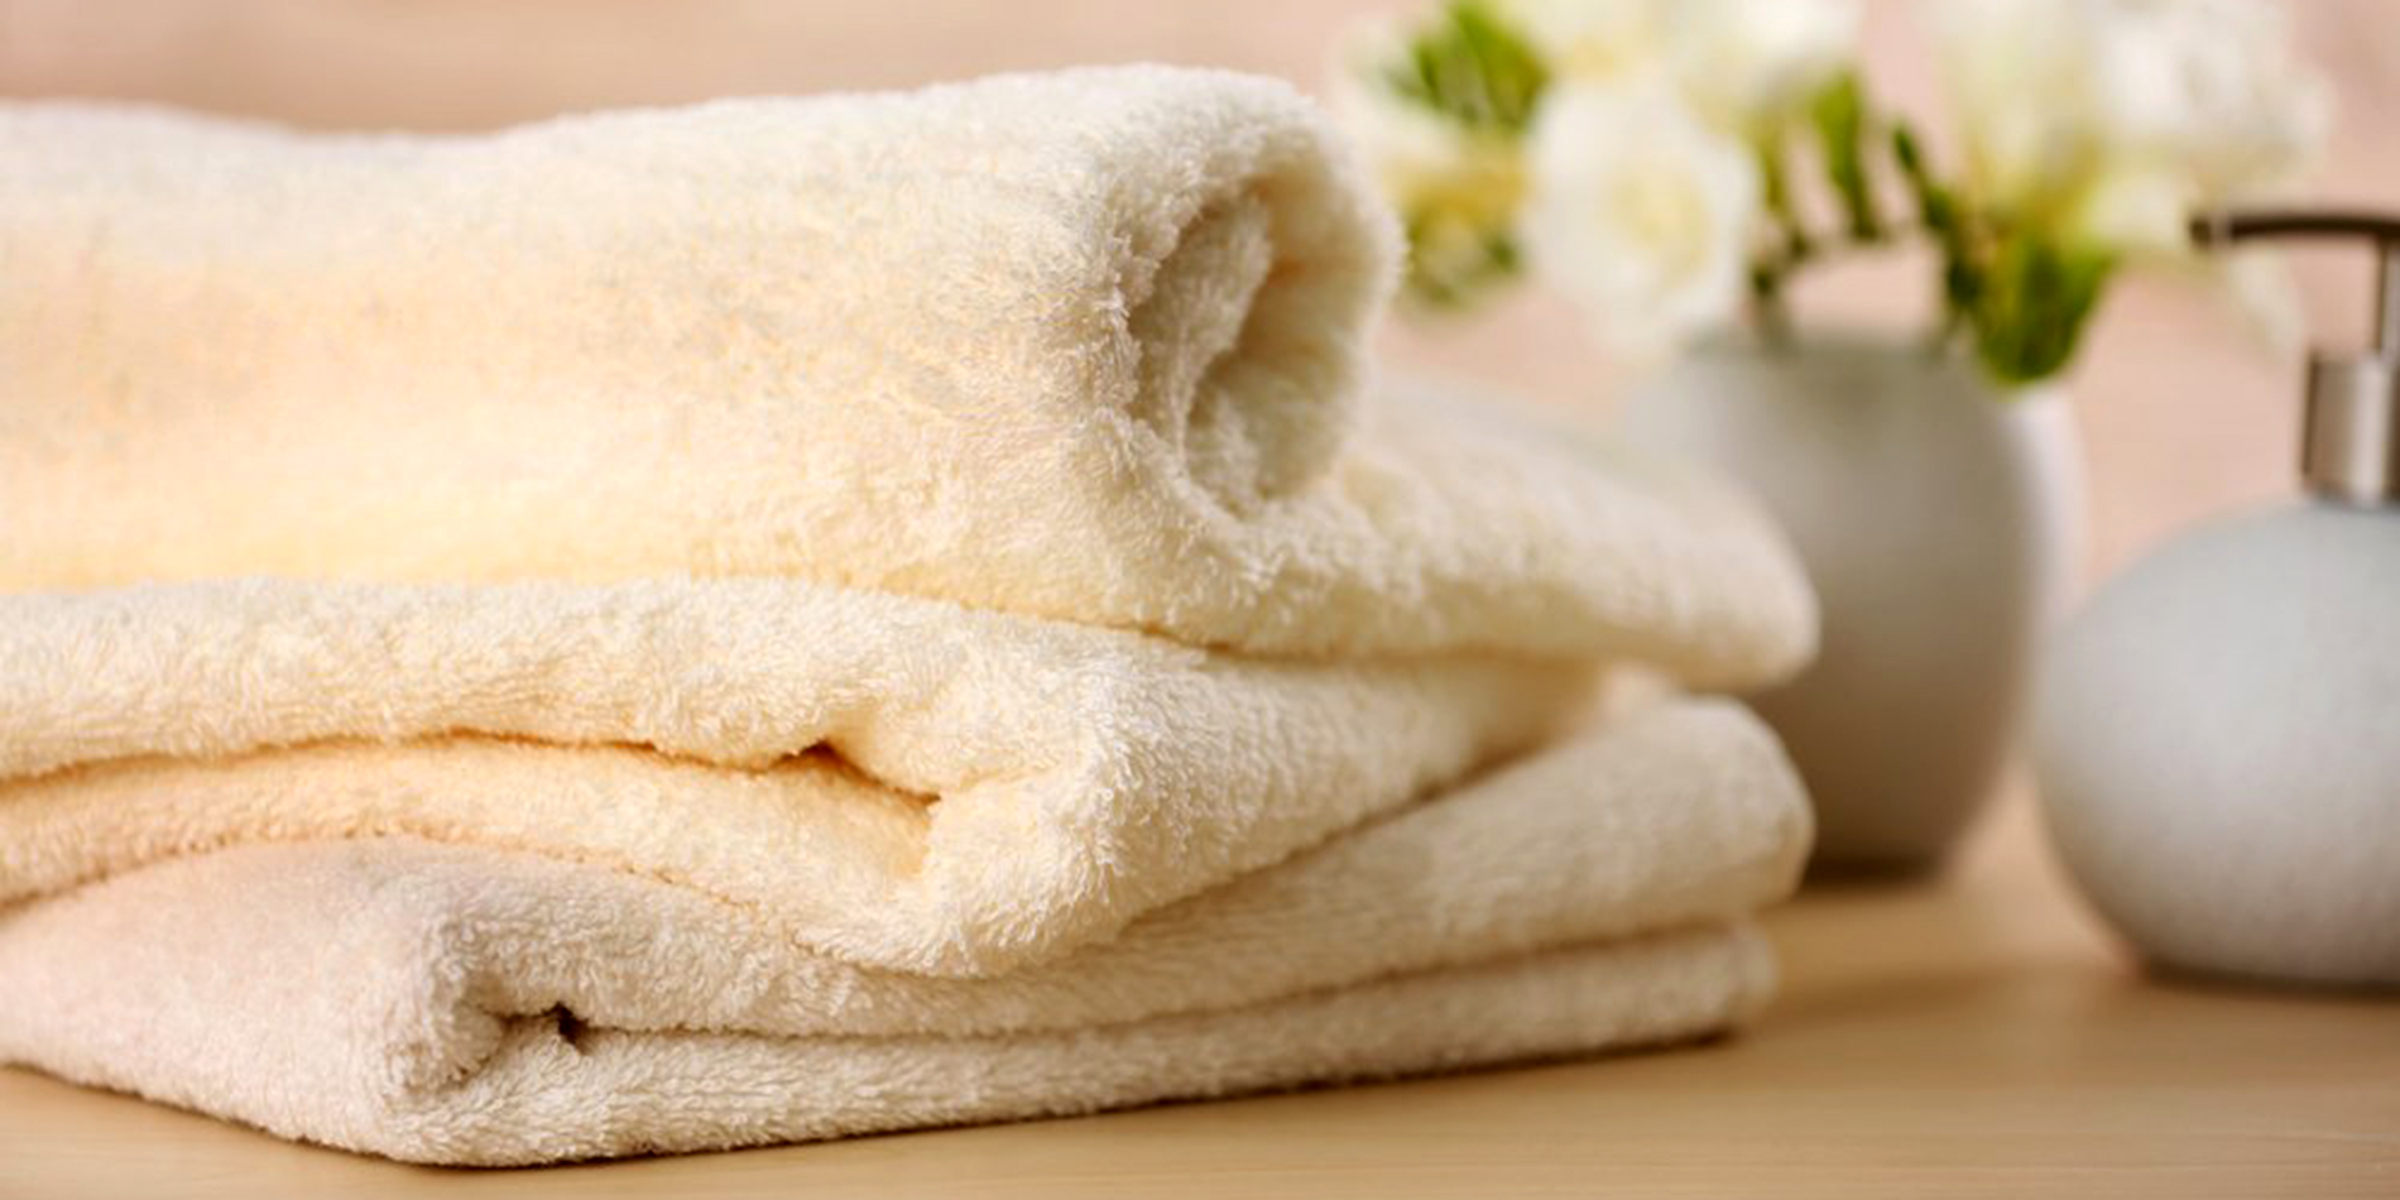 How do you get the sewer smell out of towels?